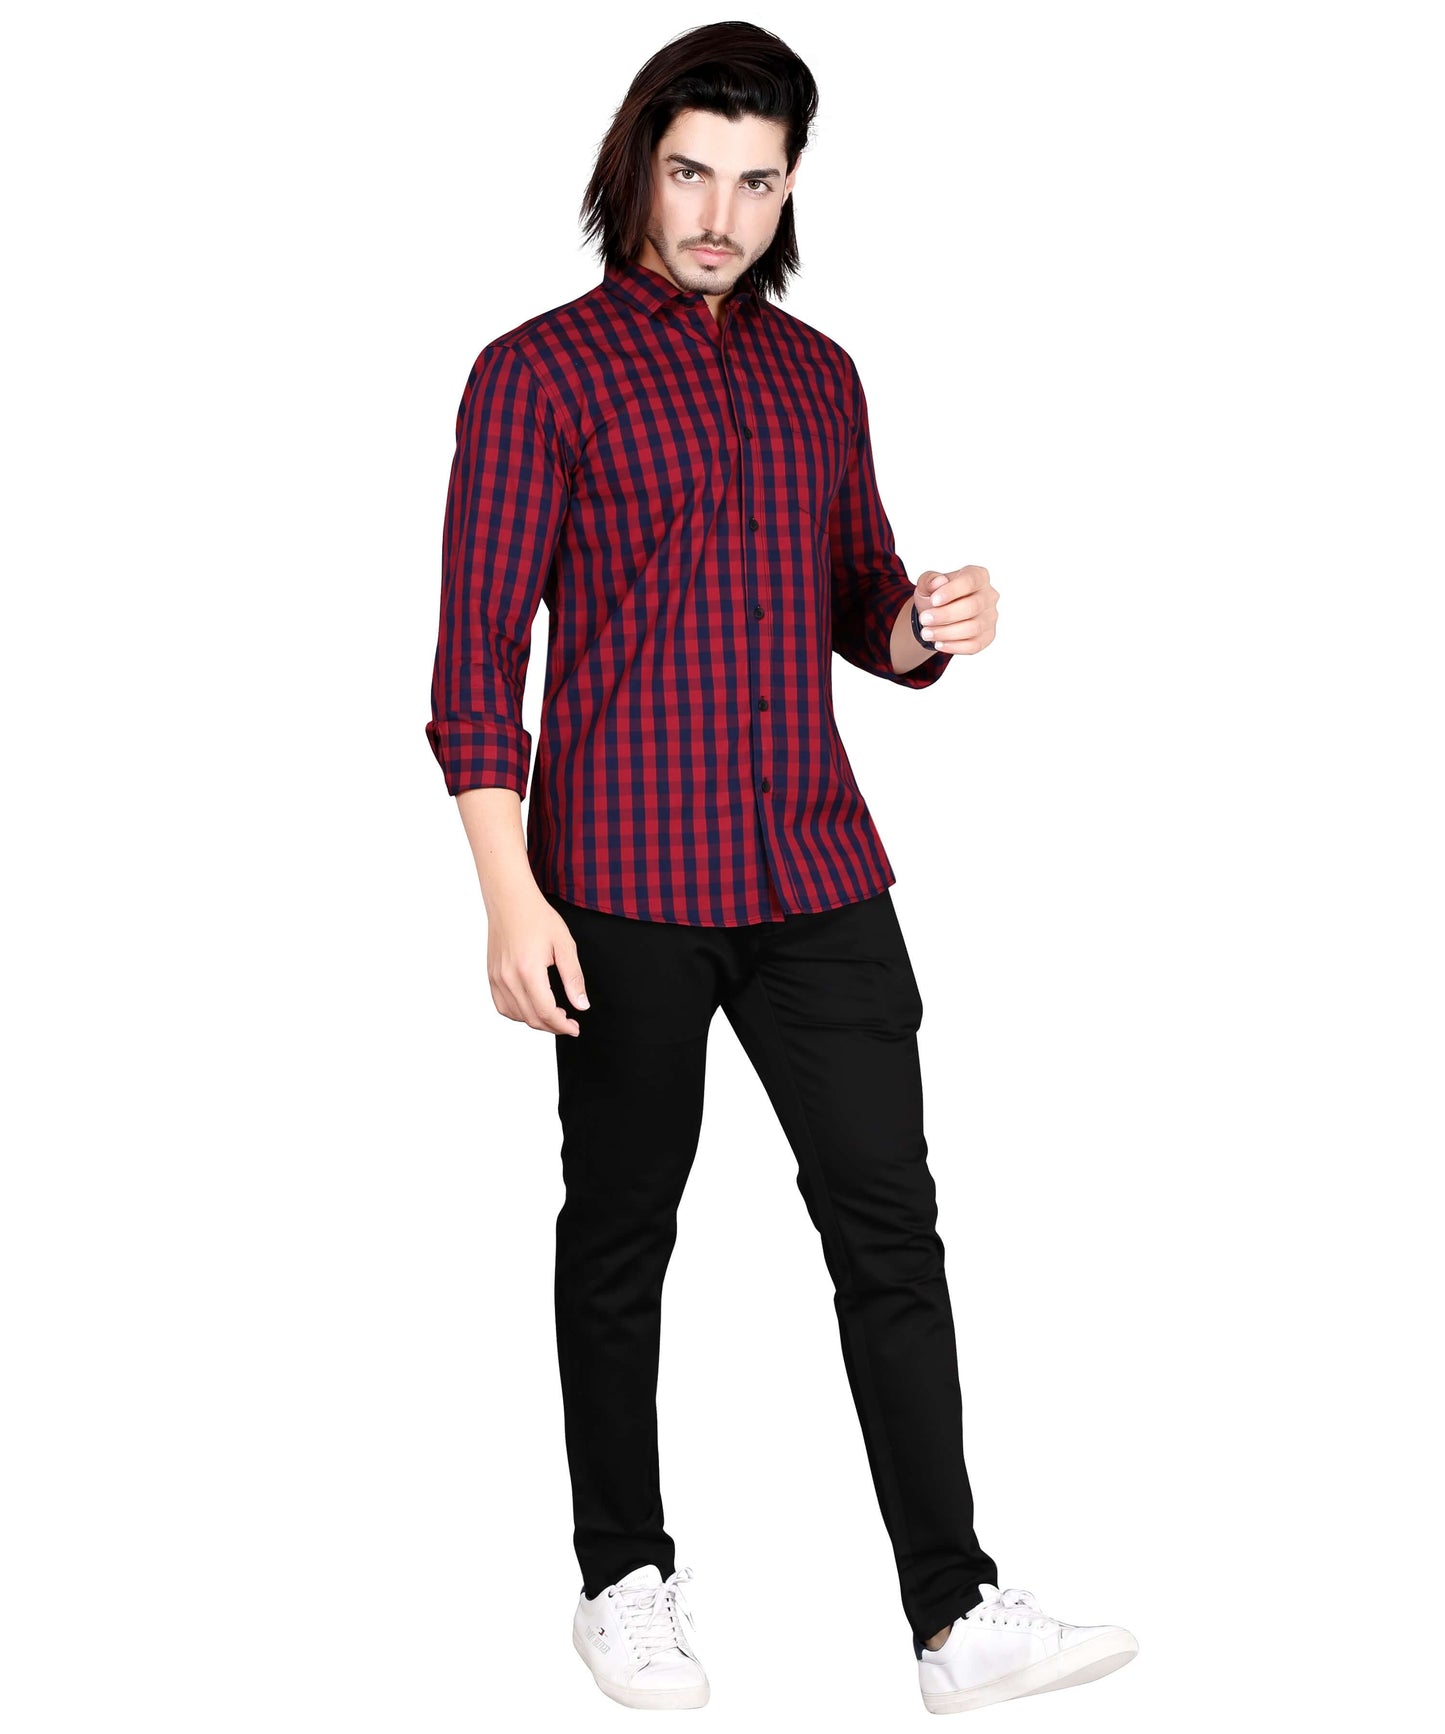 5thanfold Men's Casual Pure Cotton Full Sleeve Checkered Red Slim Fit Shirt